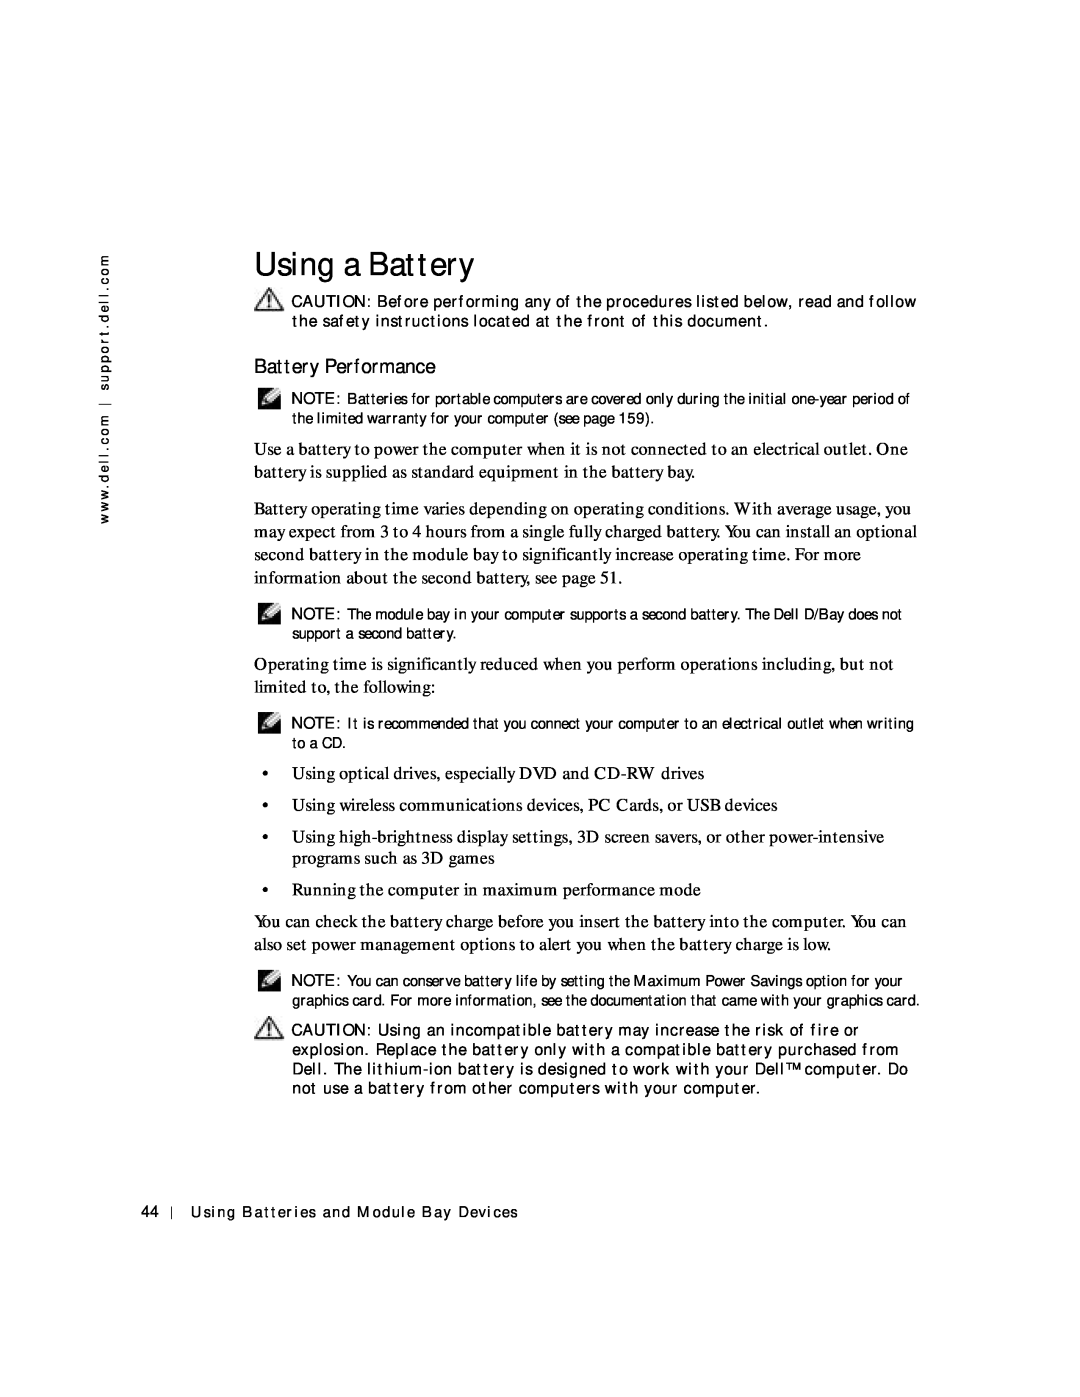 Dell 8600 manual Using a Battery, Battery Performance 